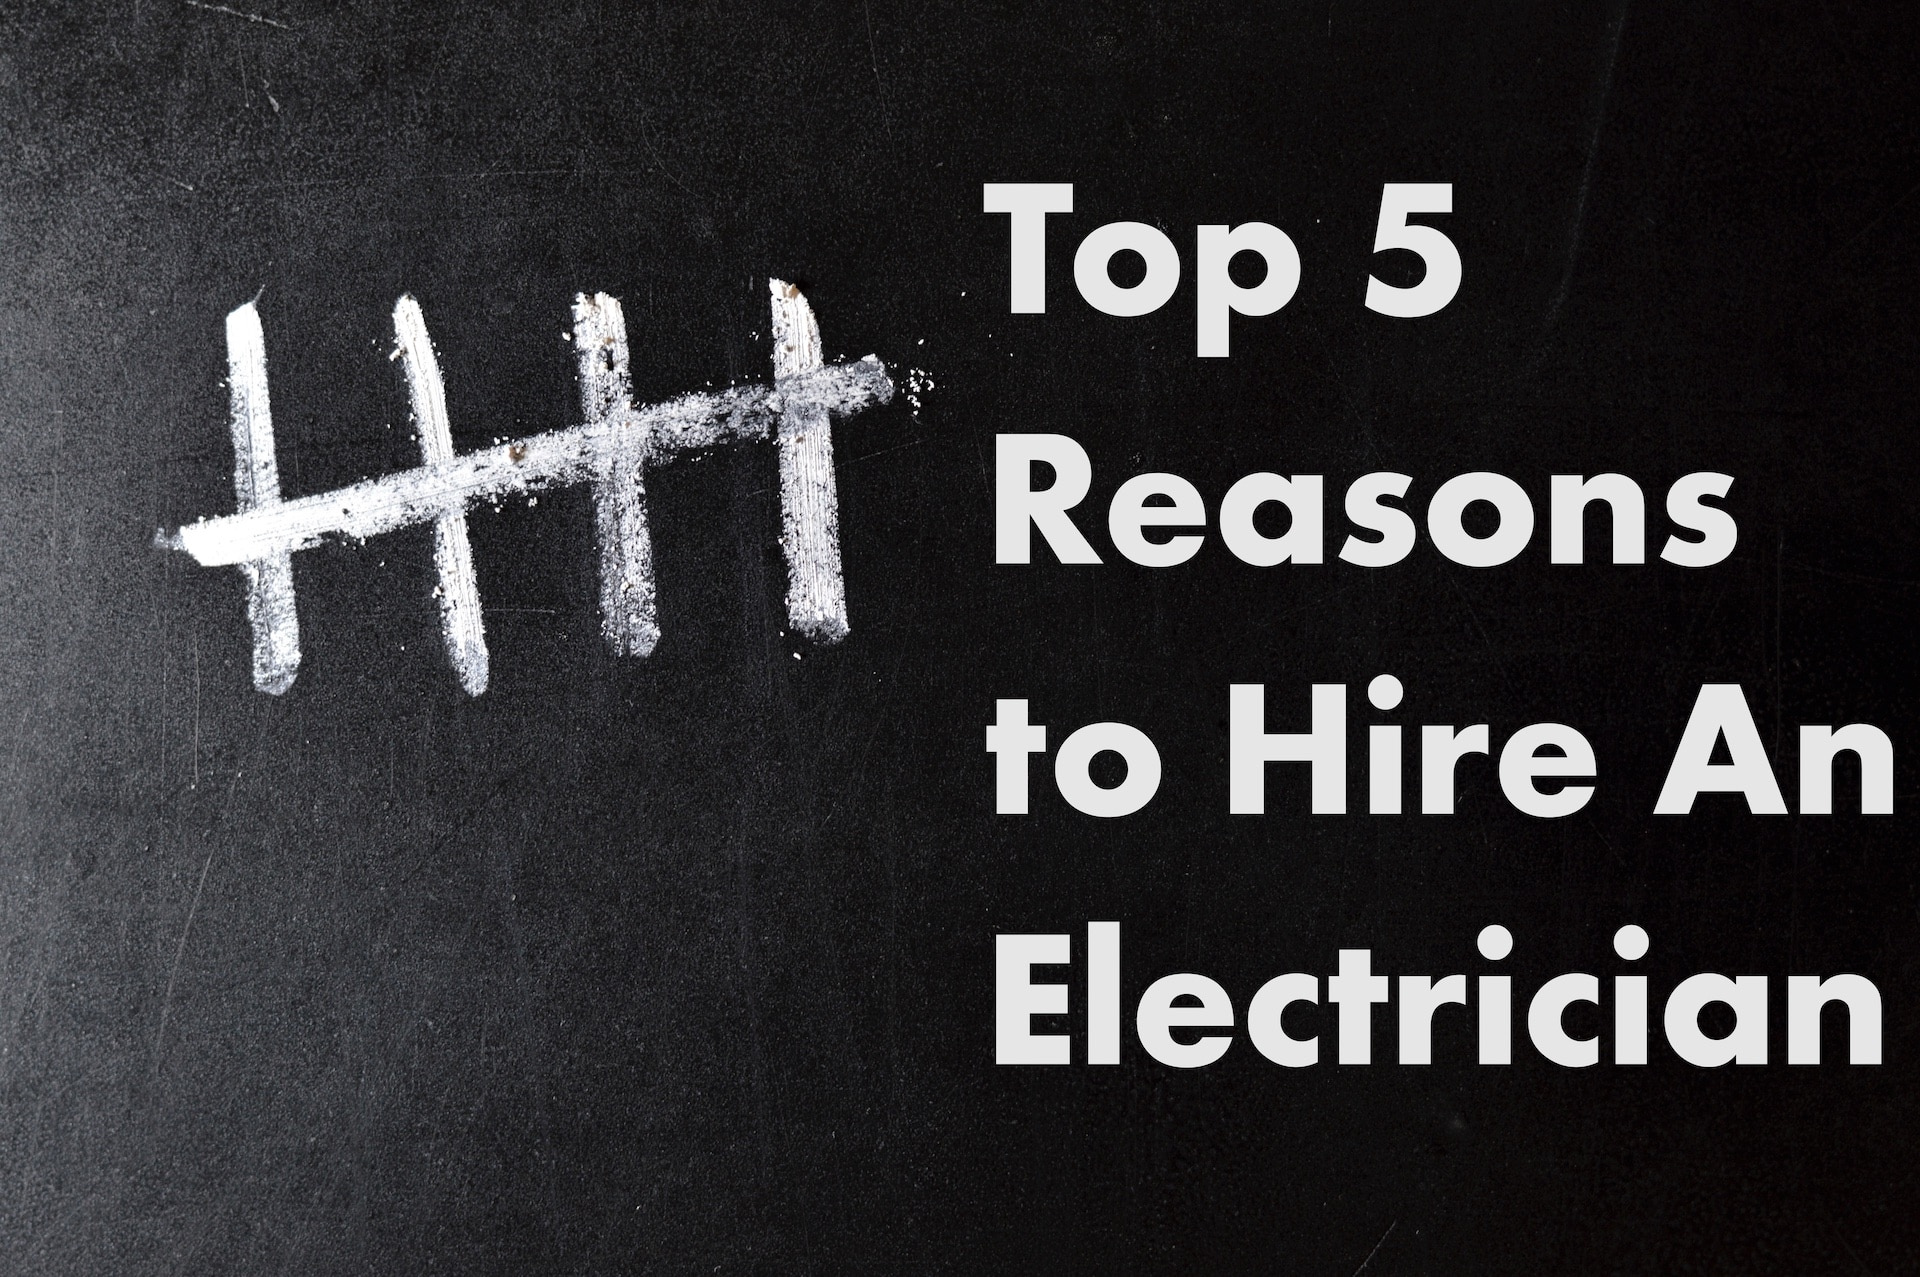 Top 5 Reasons to Hire an Electrician featured image